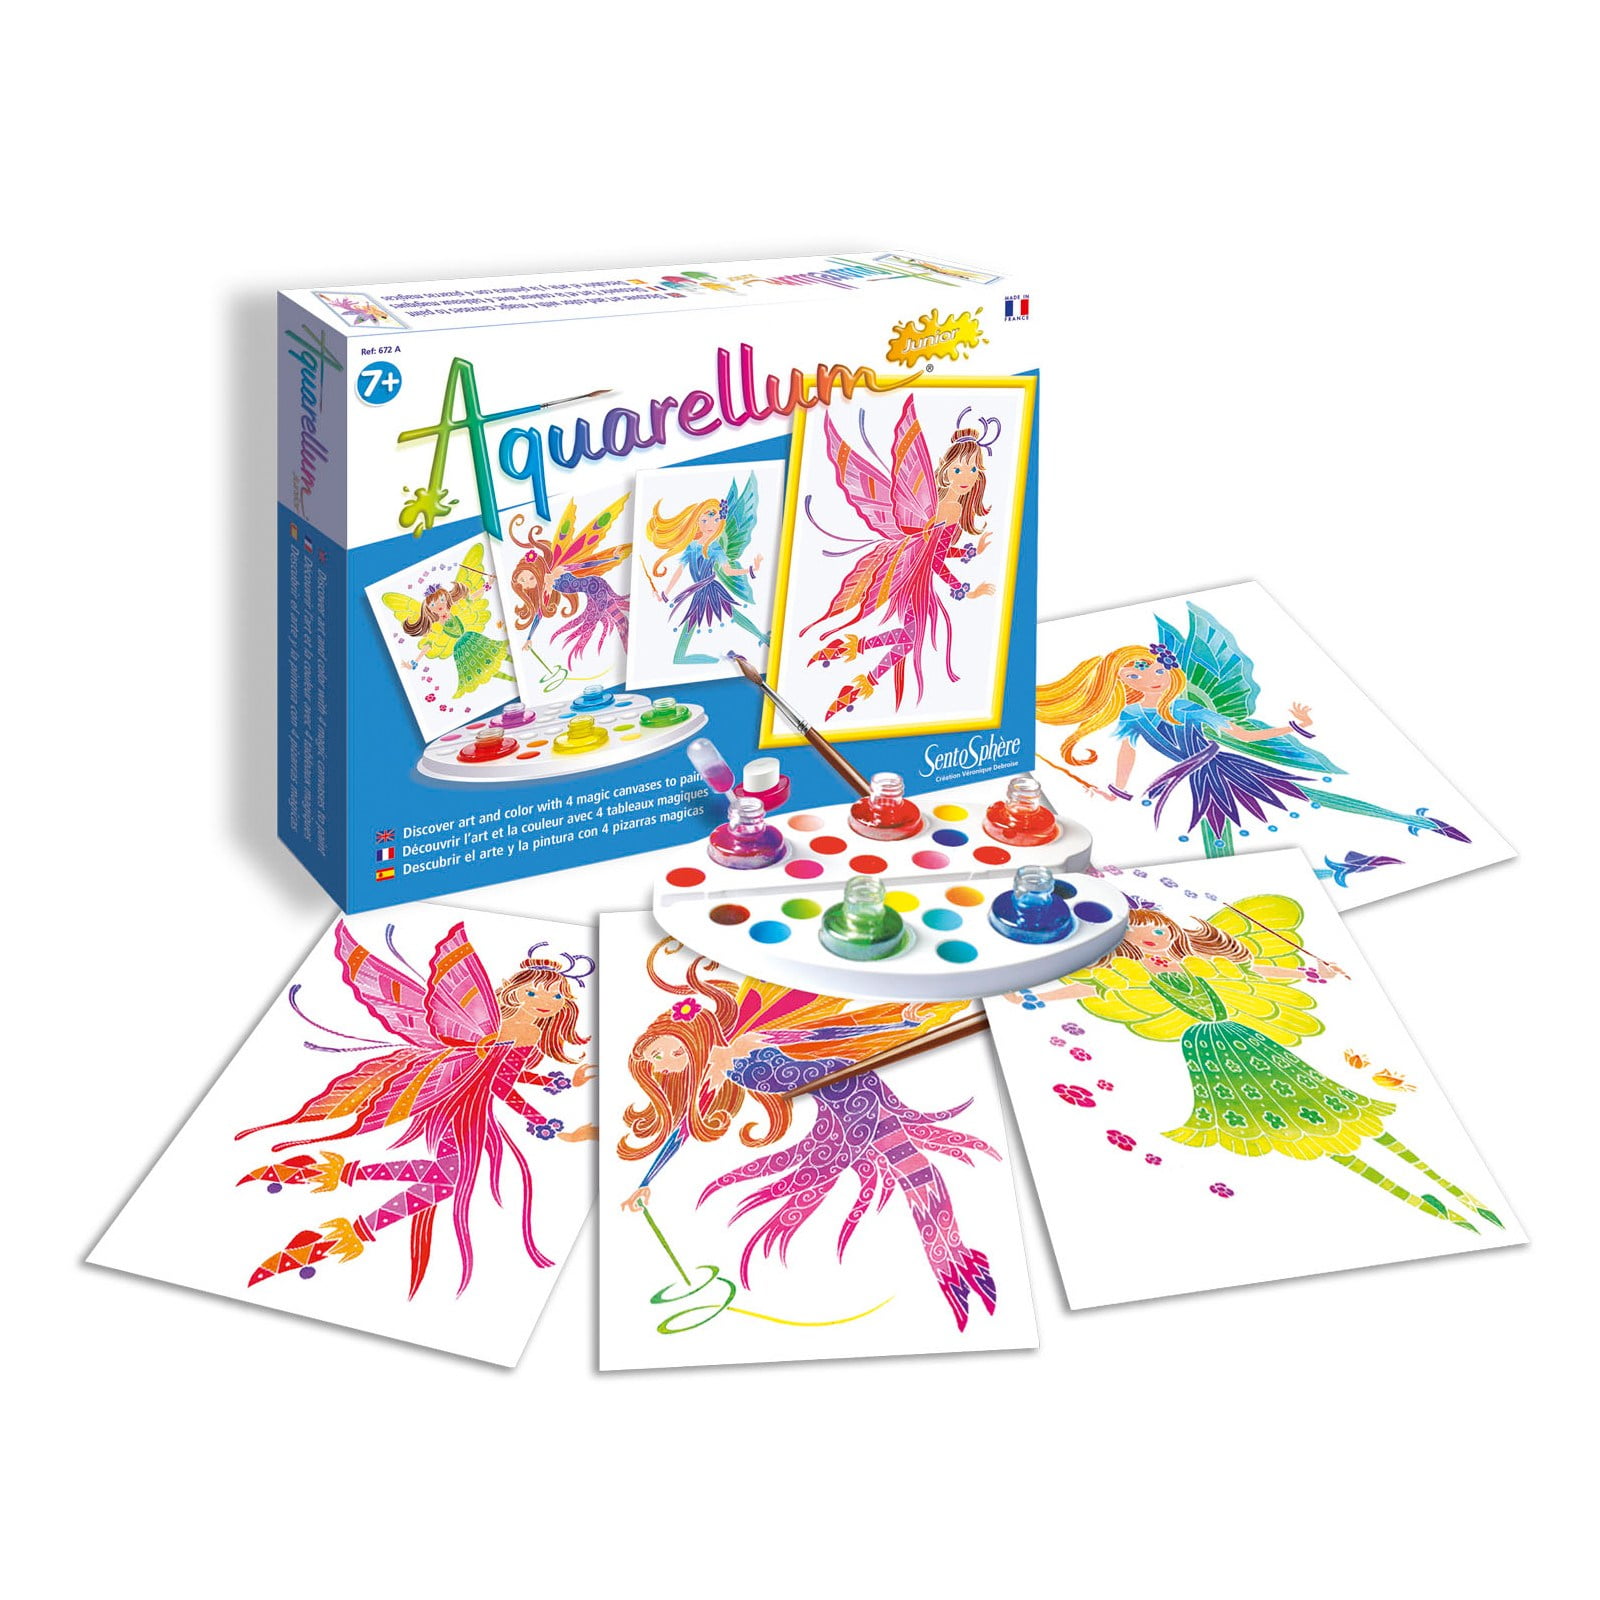 Aquarellum Mini Painting By Numbers Art Sets for Kids - BUY 2 & GET 10% OFF